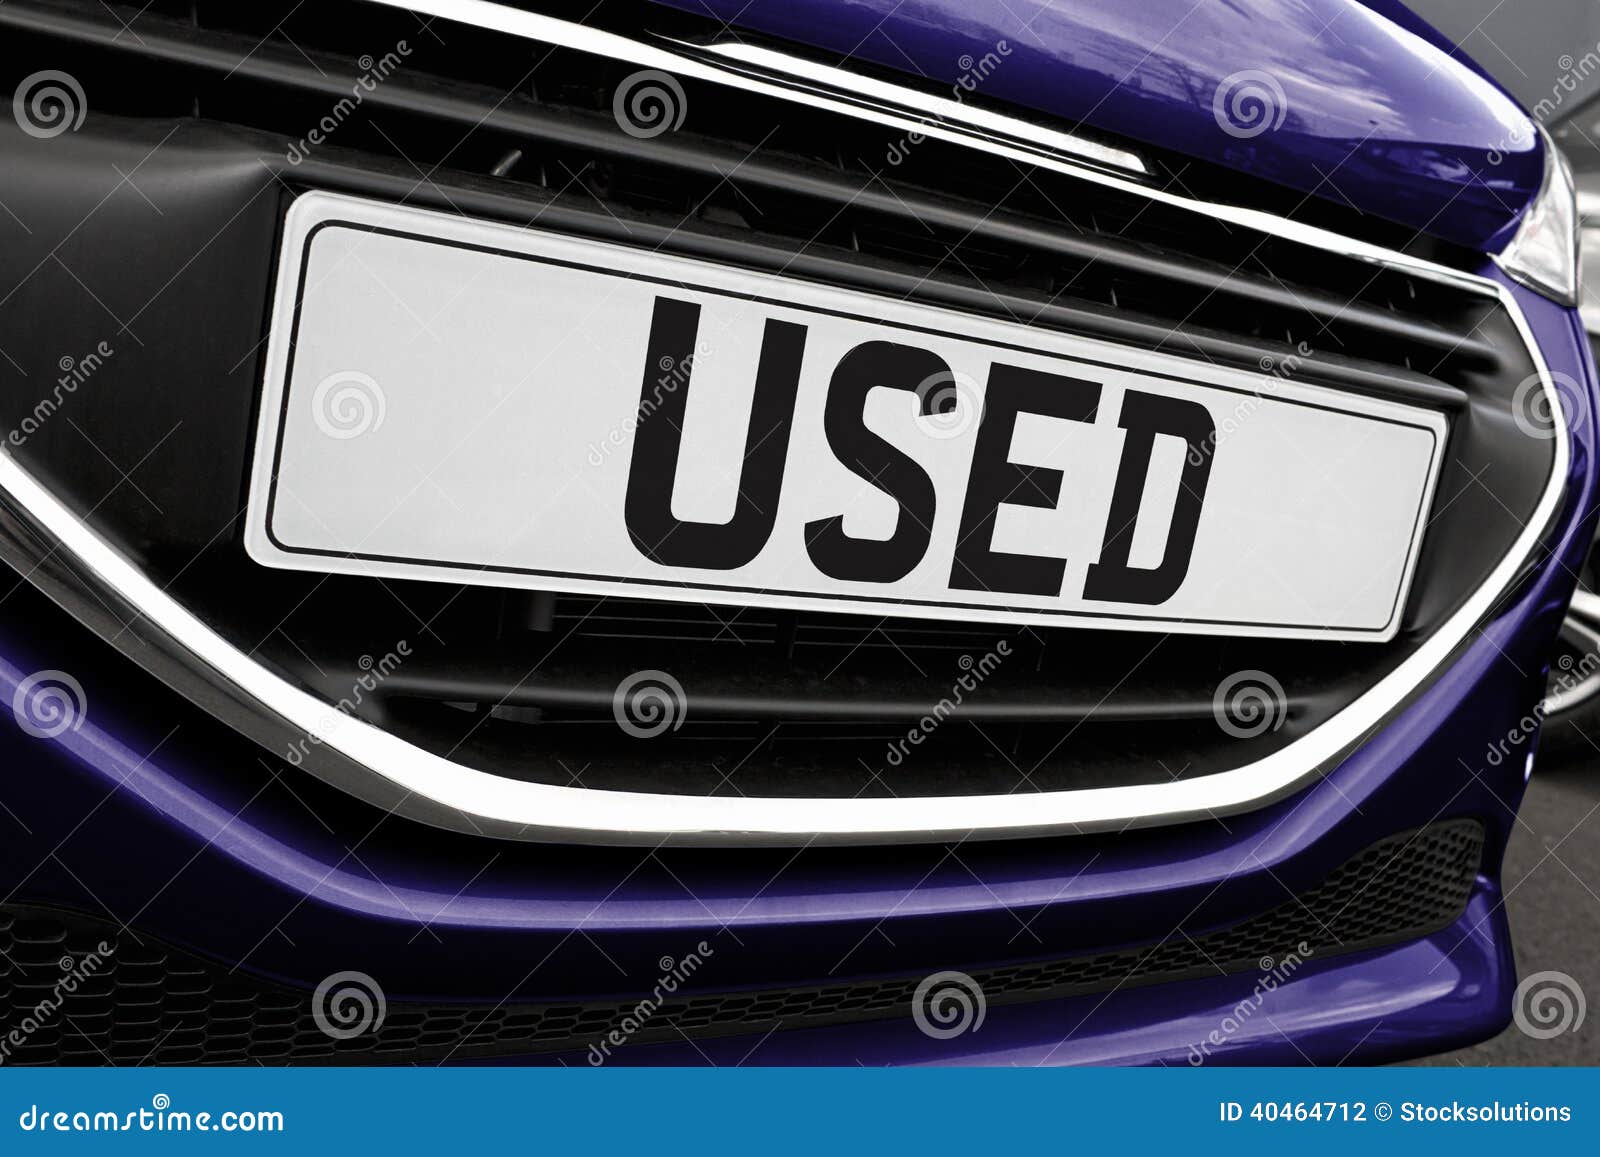 Used car Number plat